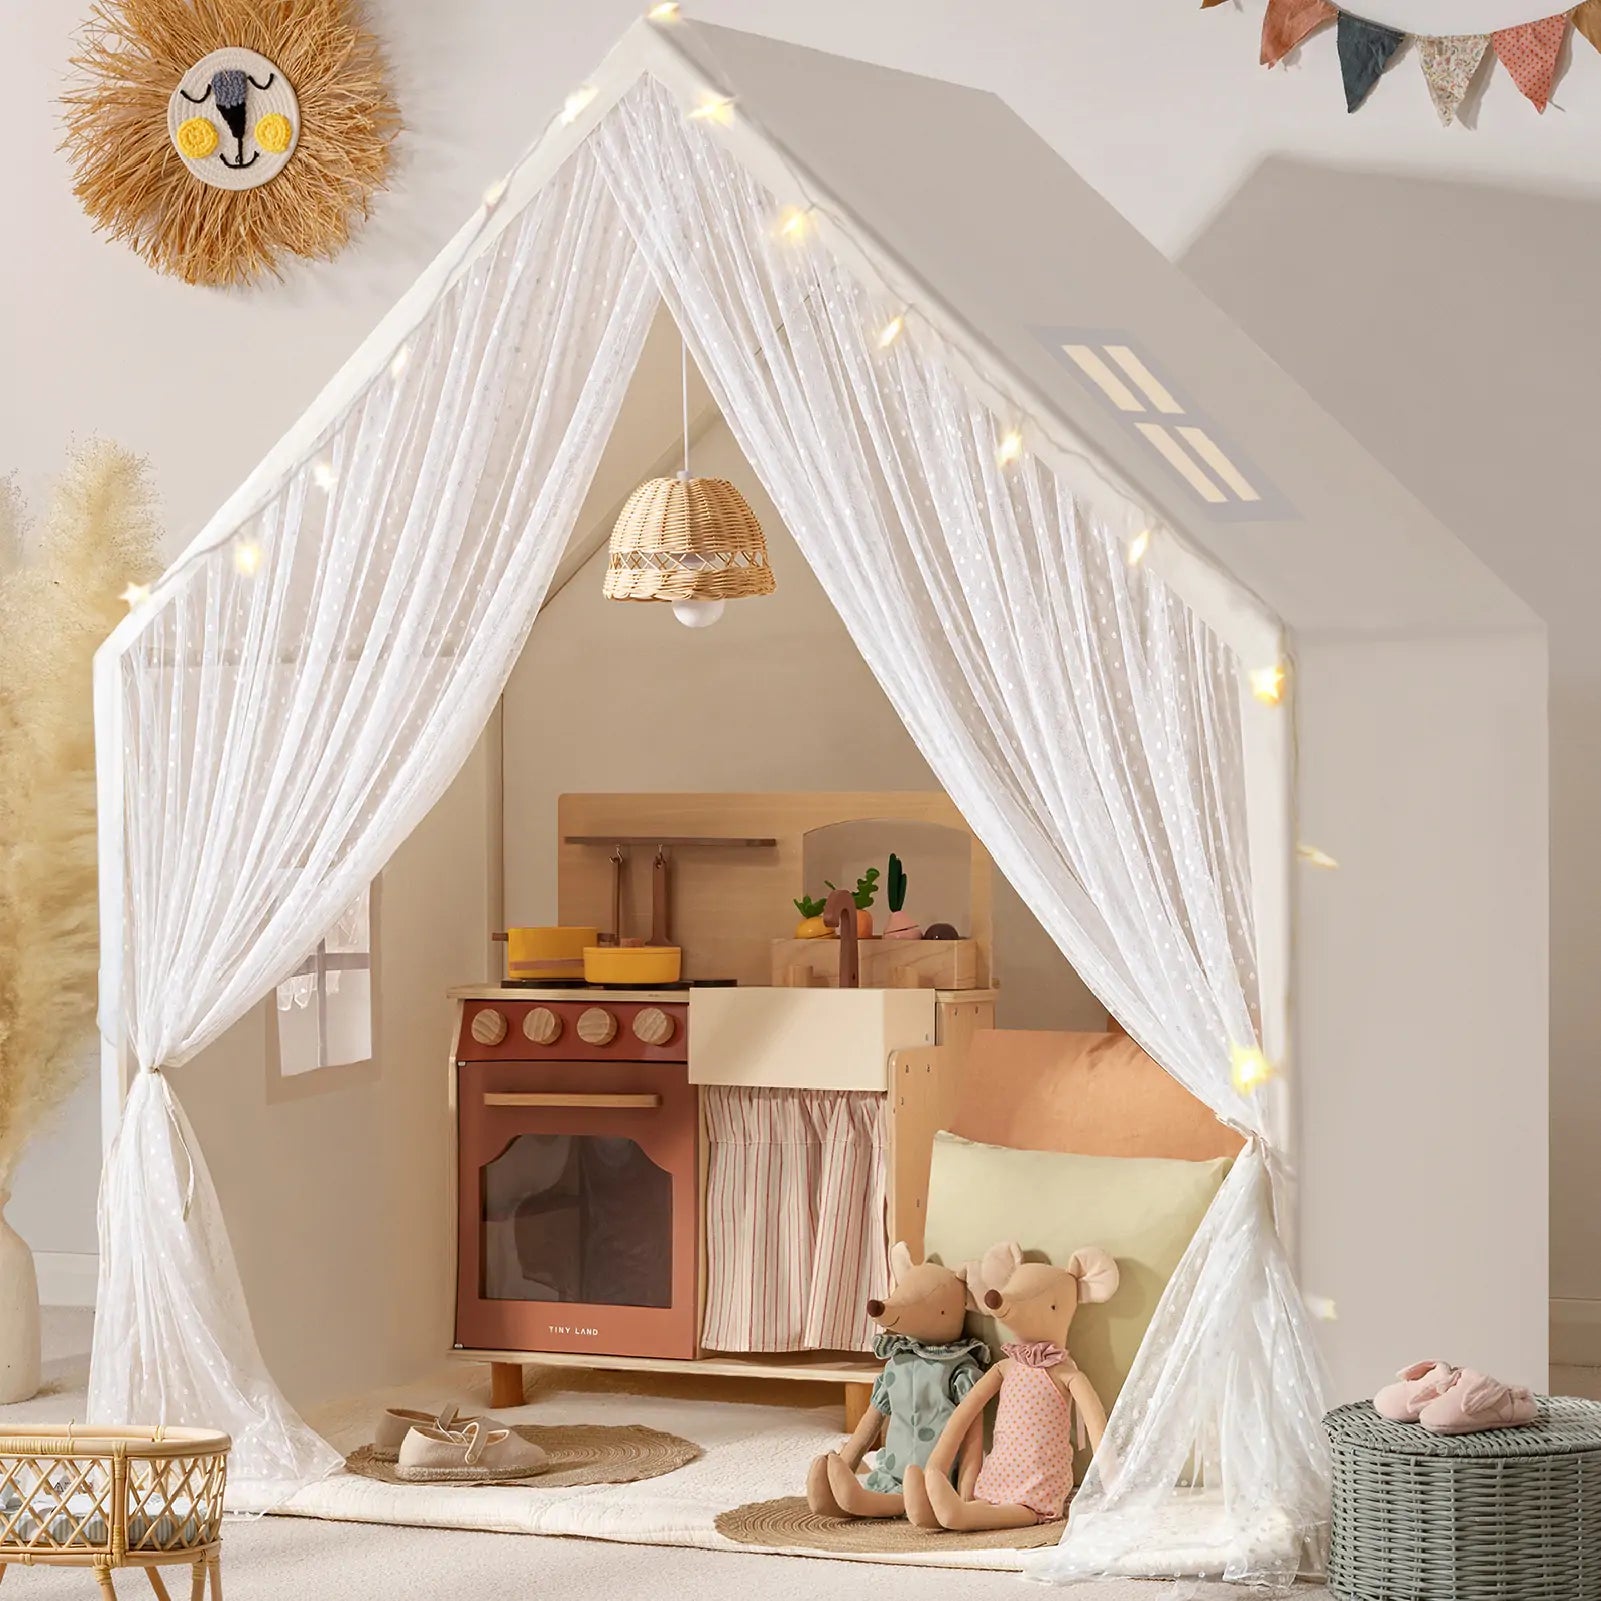 Tiny Land® Large Space Play House with Star Lights